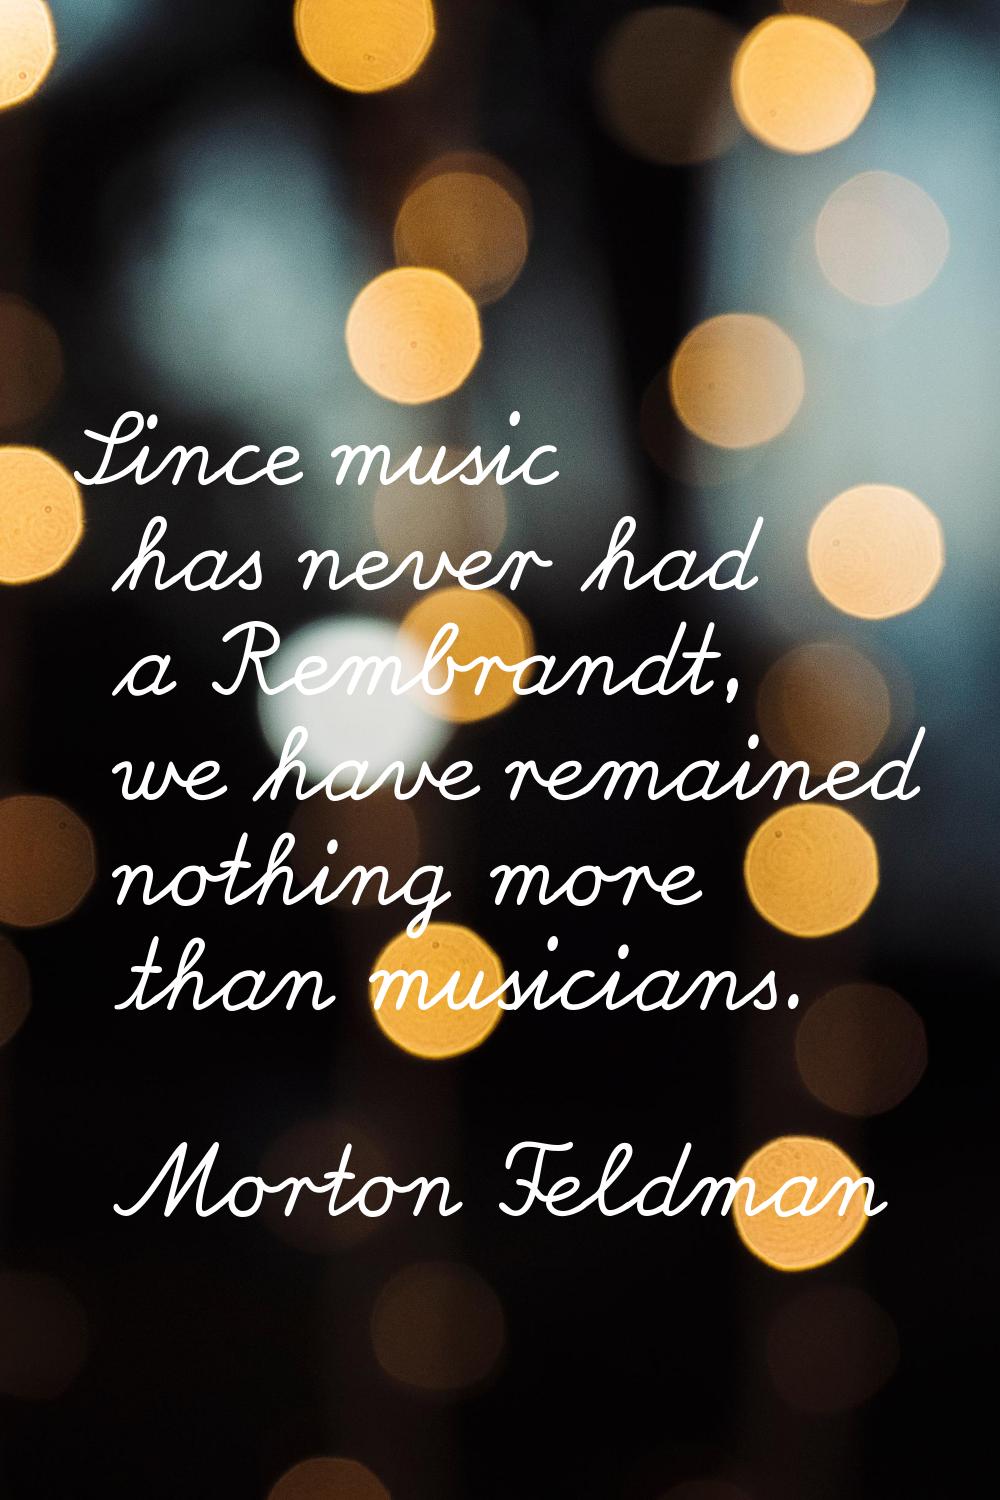 Since music has never had a Rembrandt, we have remained nothing more than musicians.